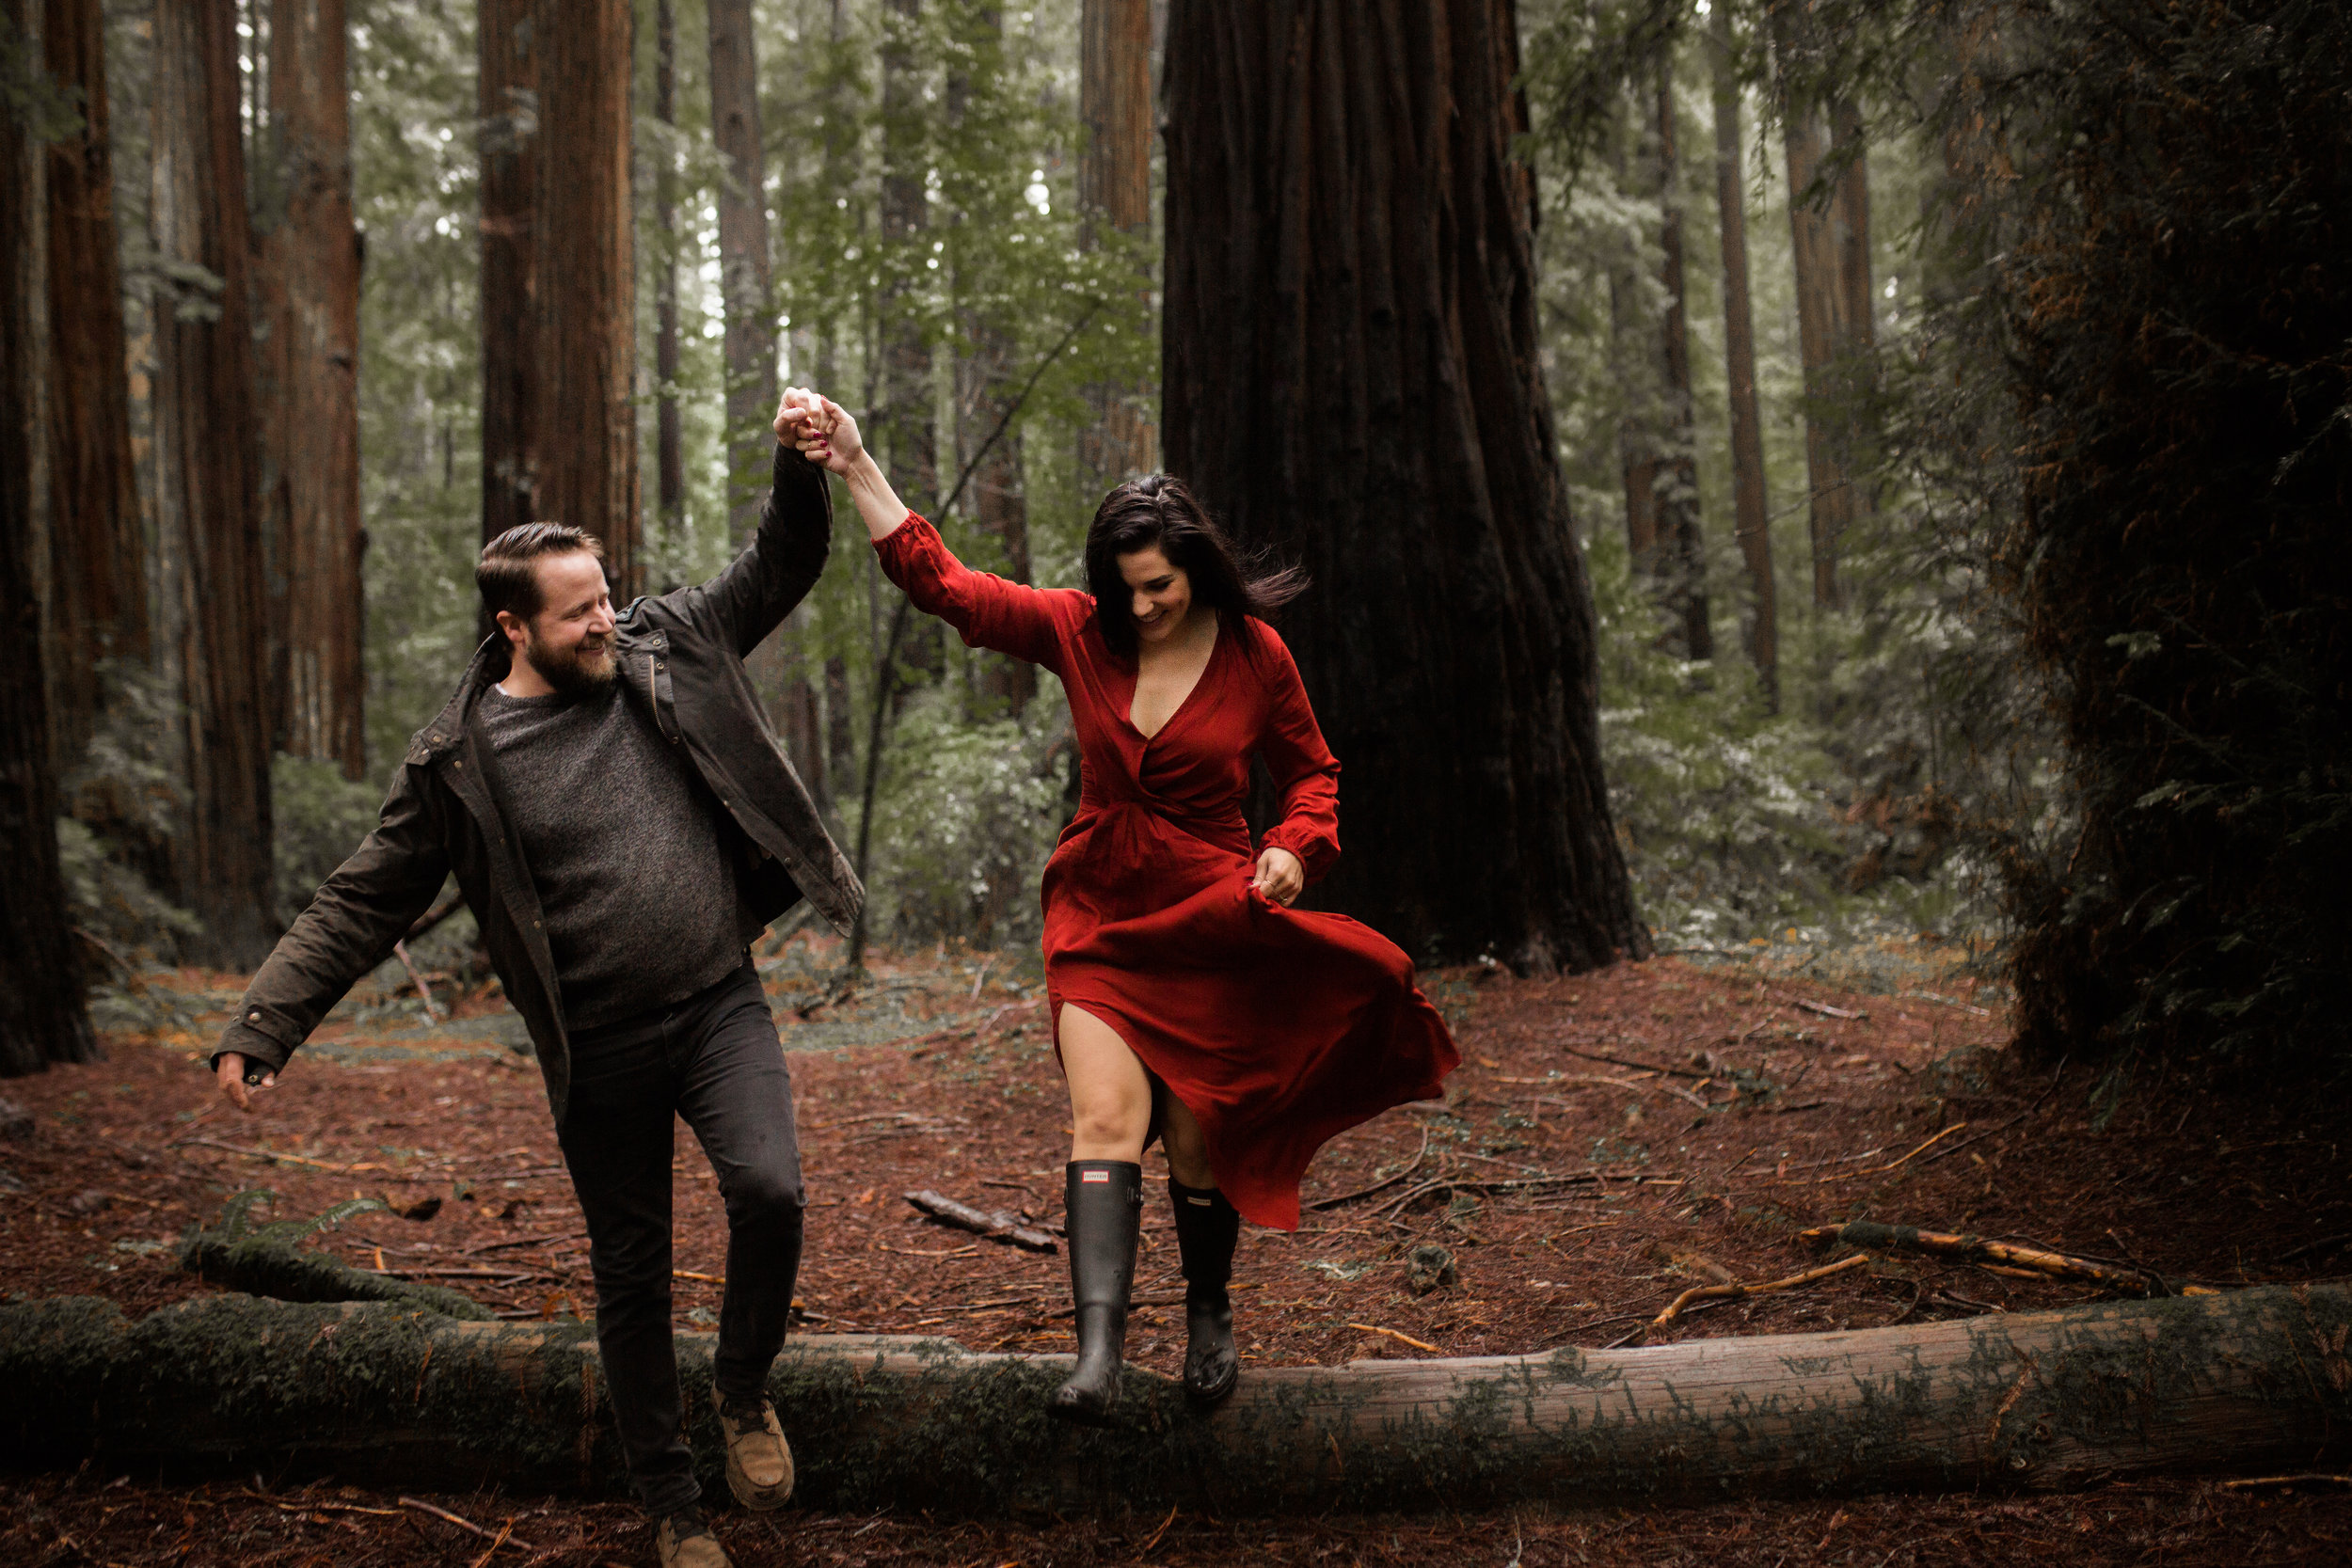 nicole-daacke-photography-redwoods-national-park-forest-rainy-foggy-adventure-engagement-session-humboldt-county-old-growth-redwood-tree-elopement-intimate-wedding-photographer-33.jpg